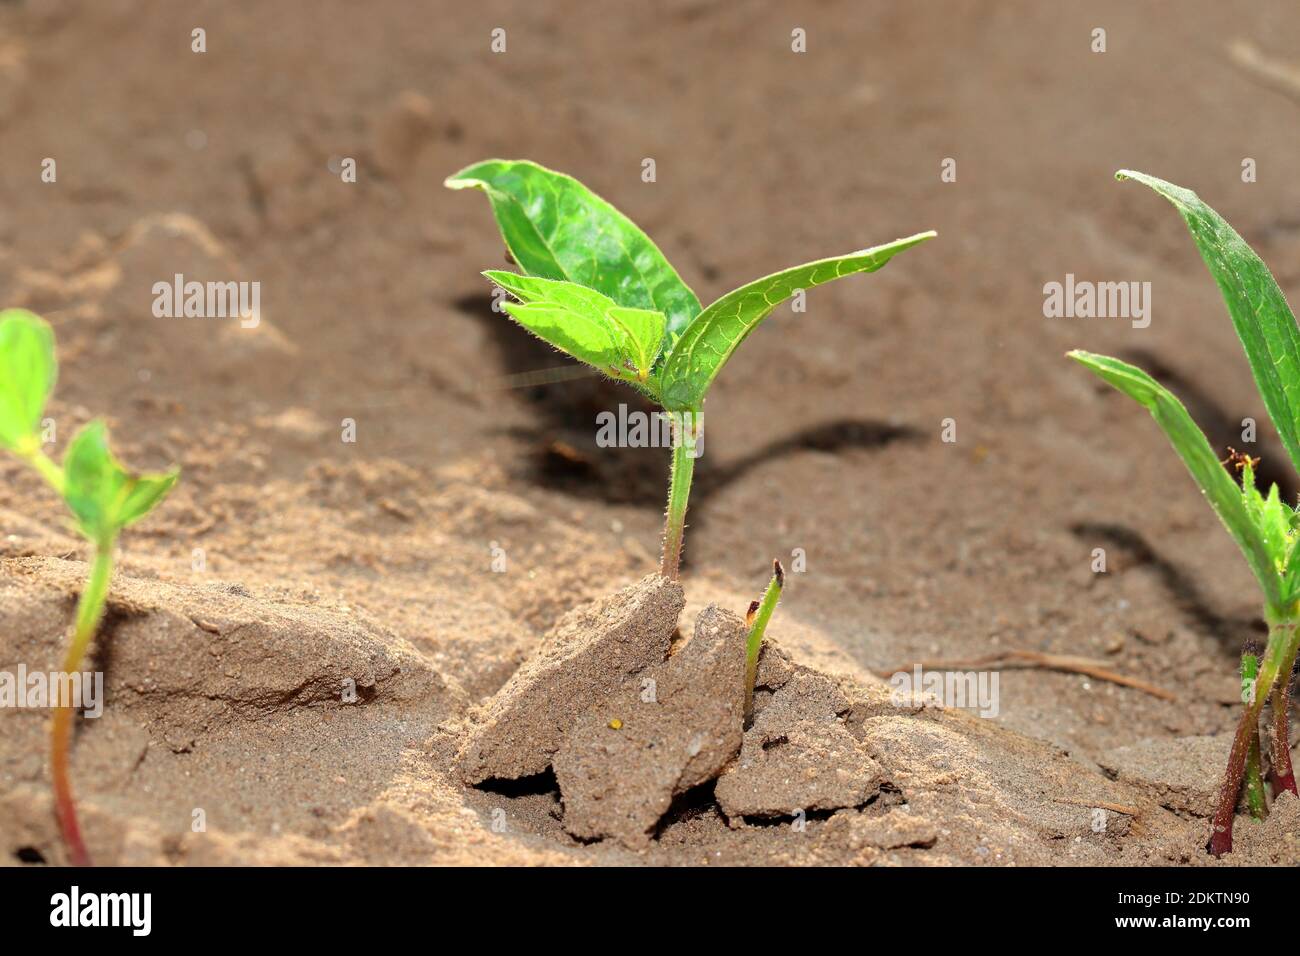 Small and Healthy green pulse plant growing well in the field Stock Photo